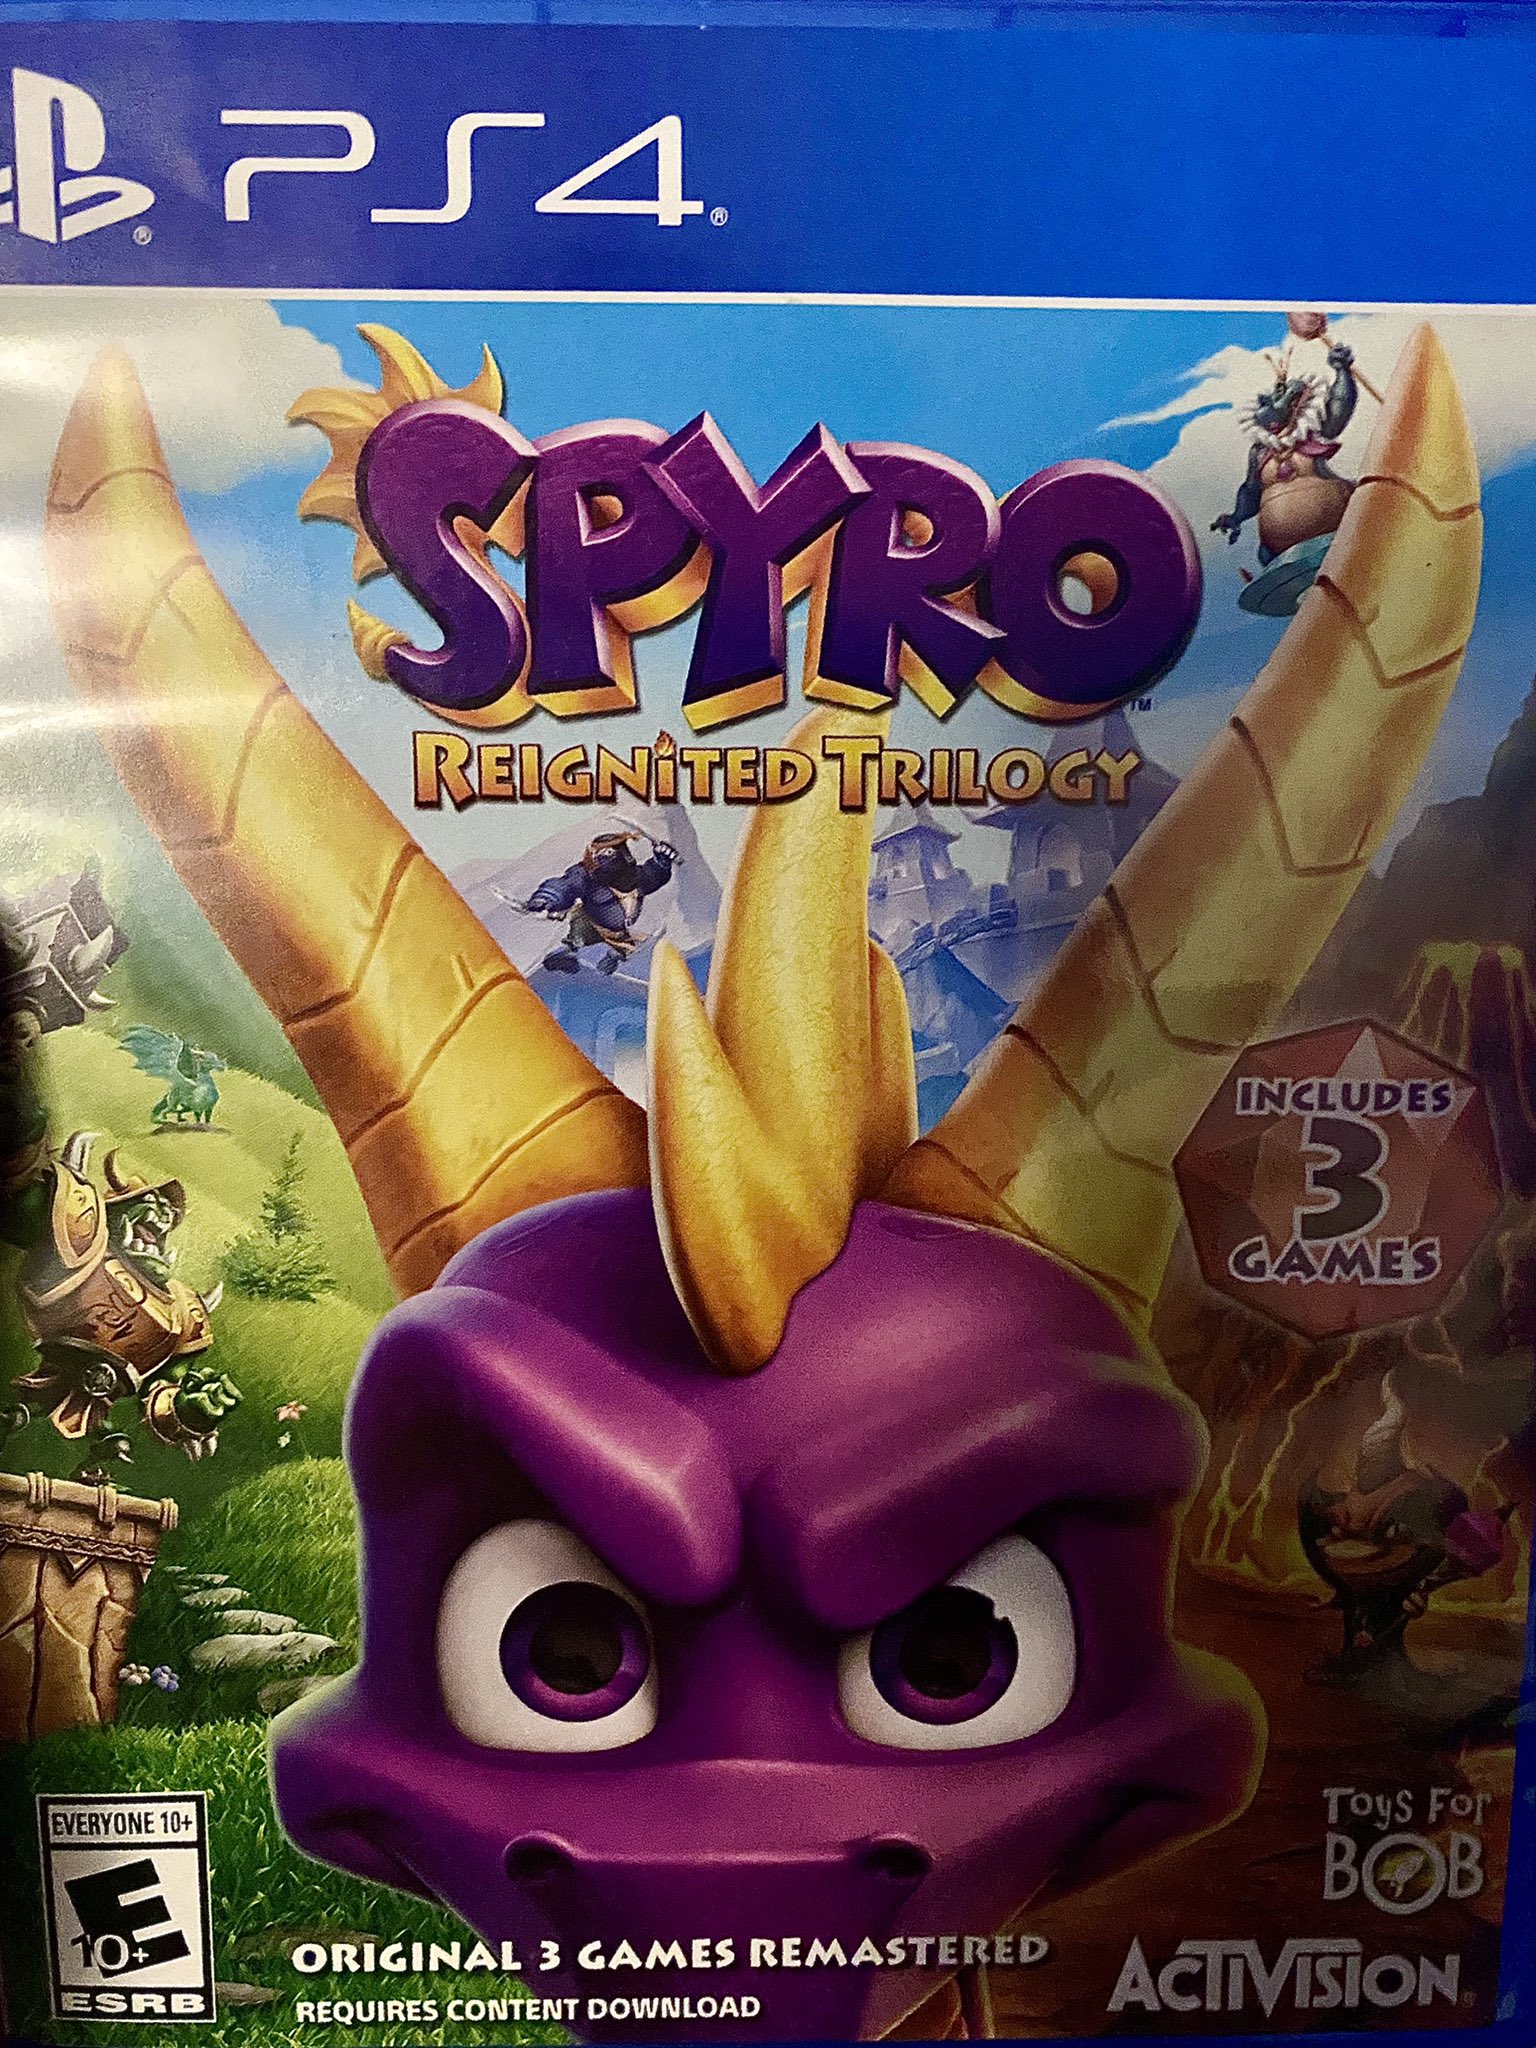 Pointer skotsk ortodoks Josh Gaming 🎮 on Twitter: "Managed to pick up something special. No this  isn't just an ordinary copy of Spyro Reignited Trilogy on PS4. This here is  the reissue that comes with